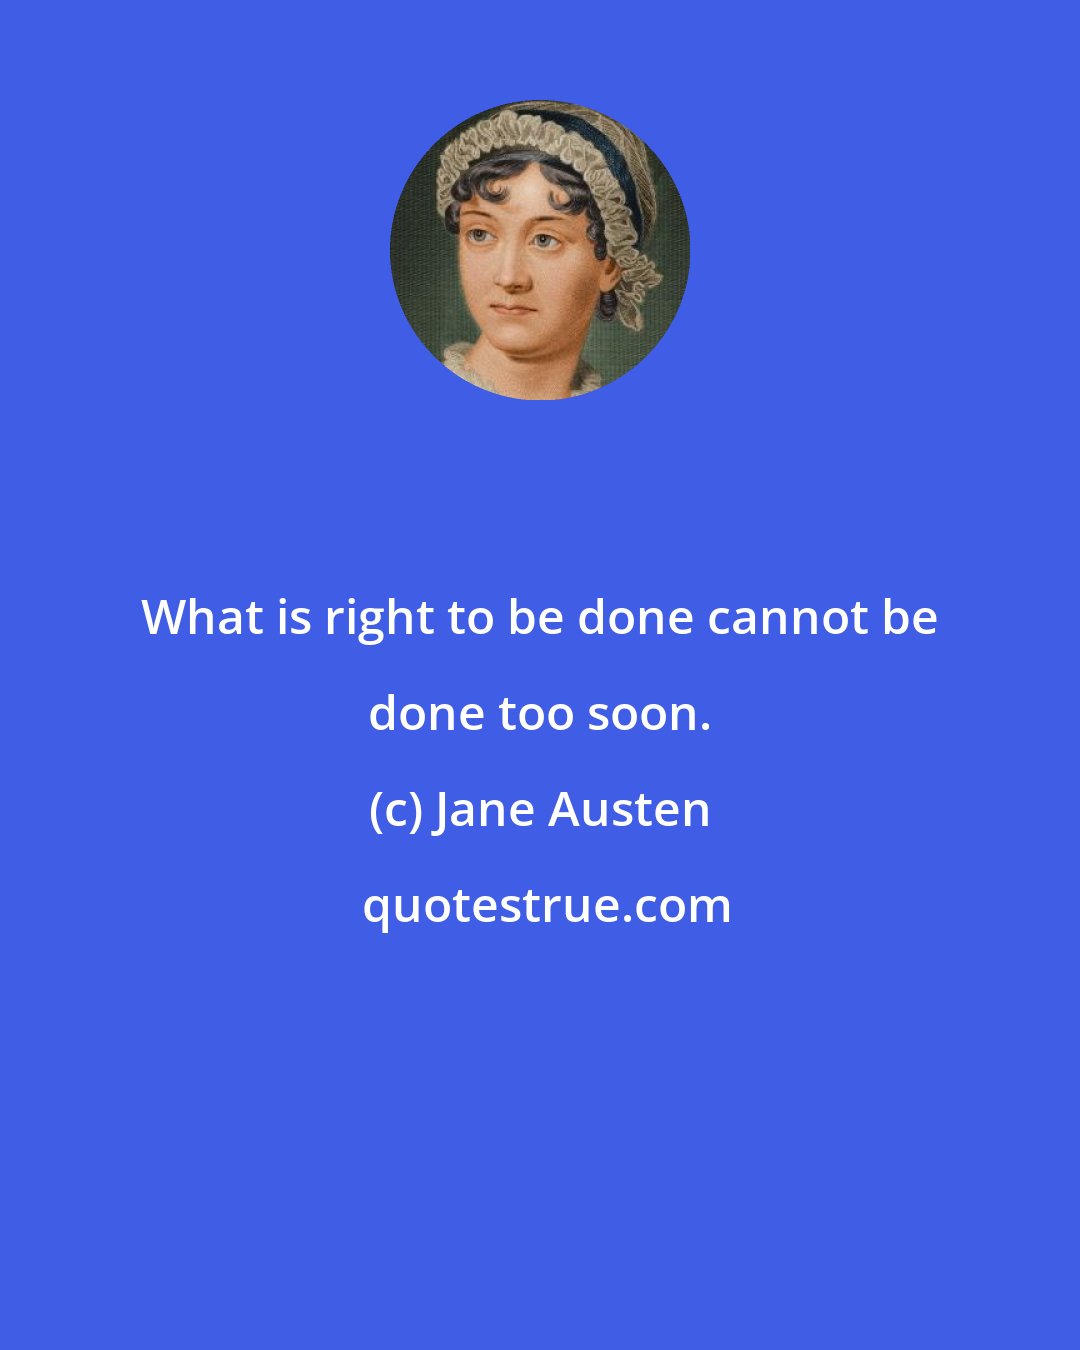 Jane Austen: What is right to be done cannot be done too soon.